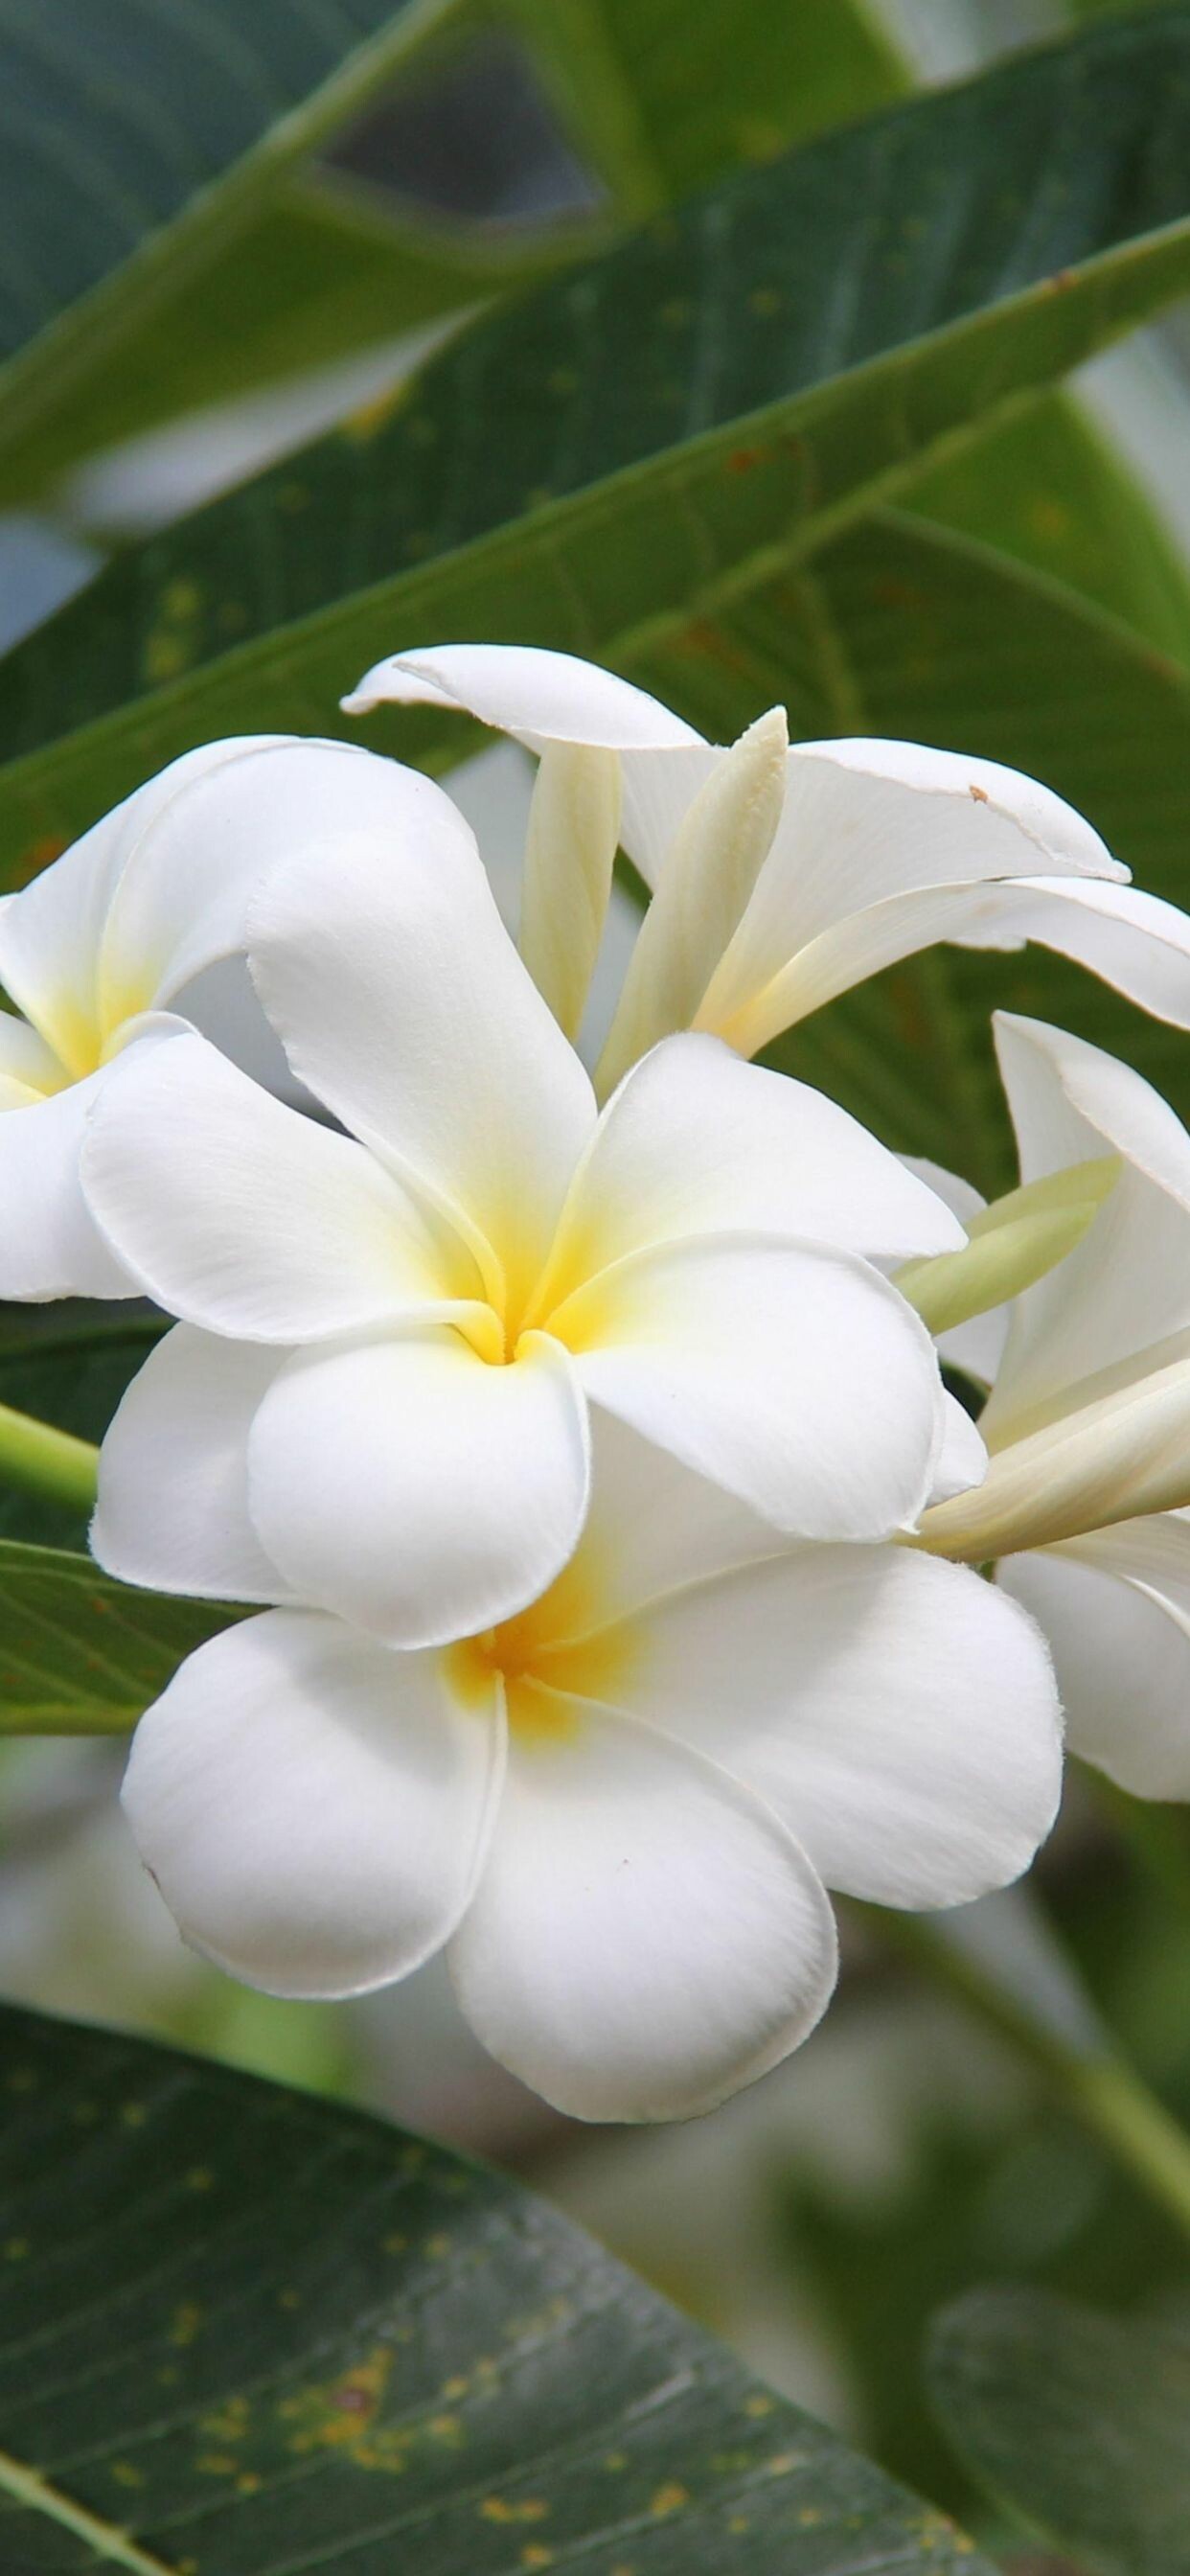 Frangipani Flower: The stiff, leathery leaves are up to 30cm long and 10cm wide, ovate to oblong with a pointed apex and a prominent marginal vein, and leaves clustered towards the ends of the branches. 1250x2690 HD Wallpaper.